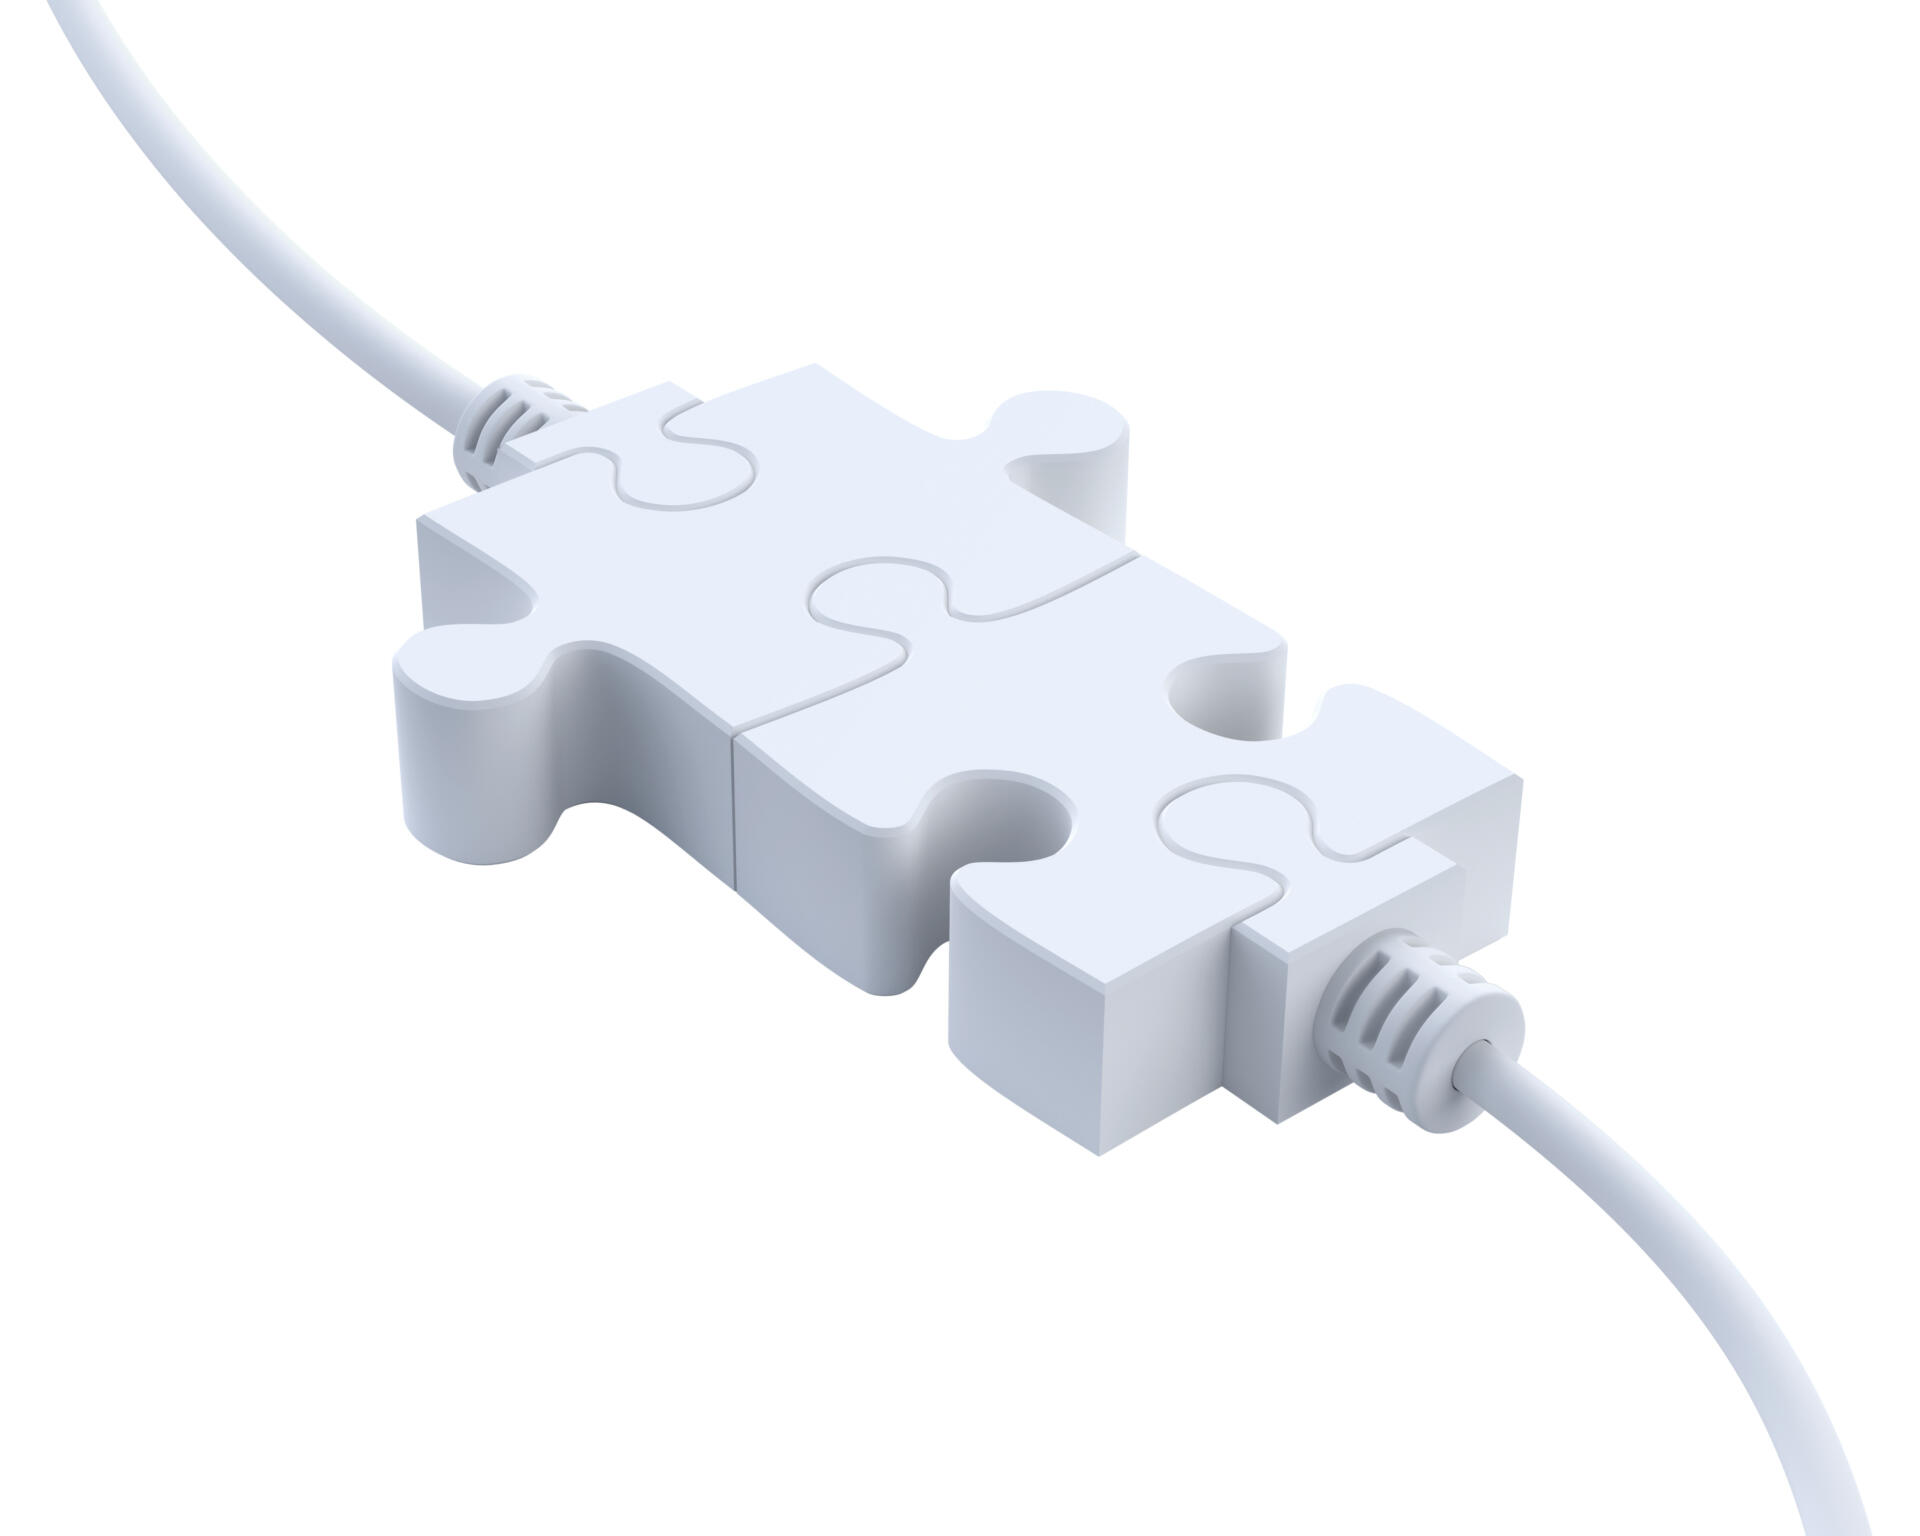 Two plugs that look like jigsaw puzzle pieces fitting together